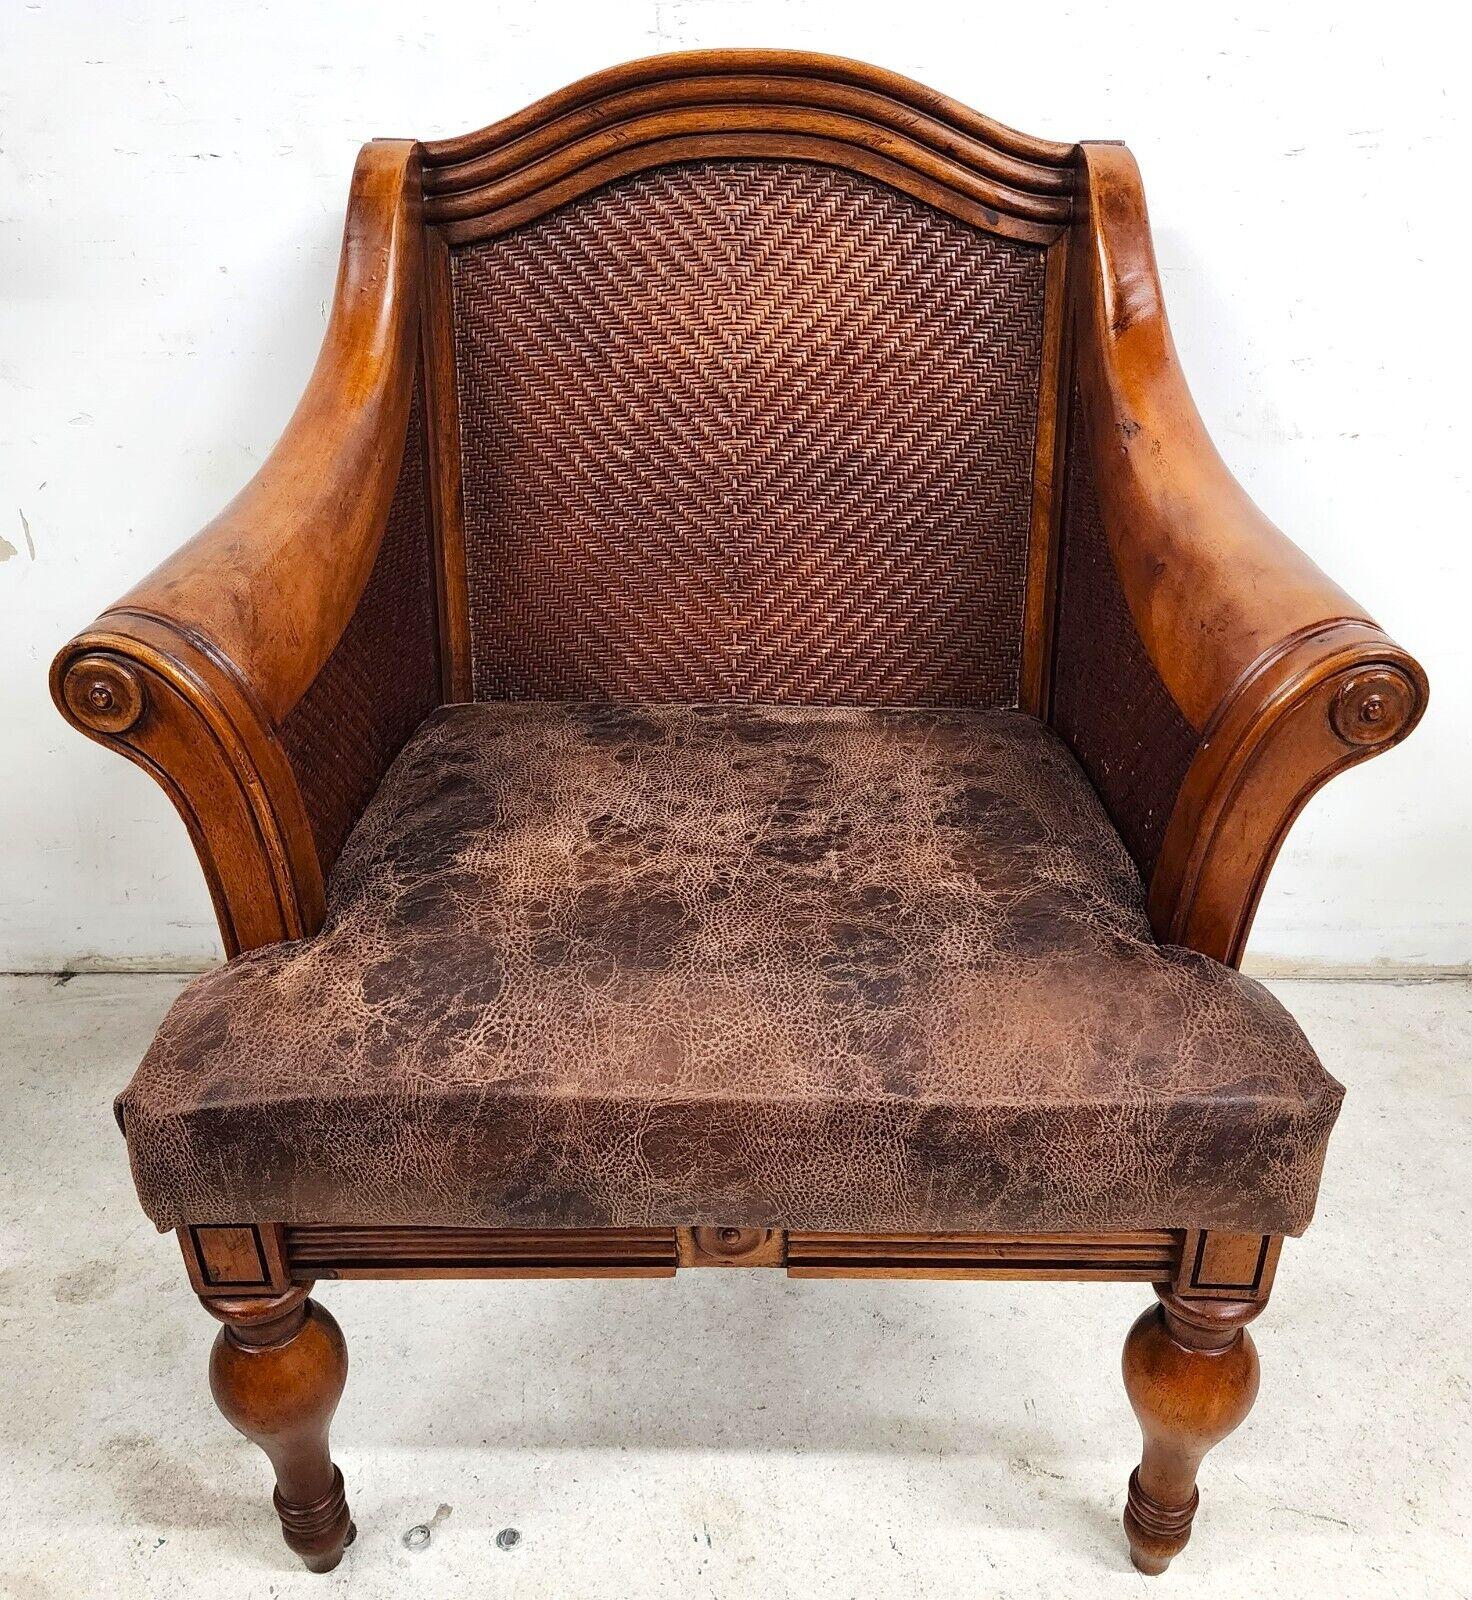 For FULL item description click on CONTINUE READING at the bottom of this page.

Offering One Of Our Recent Palm Beach Estate Fine Furniture Acquisitions Of A
English Empire Solid Wood & Wicker Armchair Lounge Chair
Very heavy and solid wood